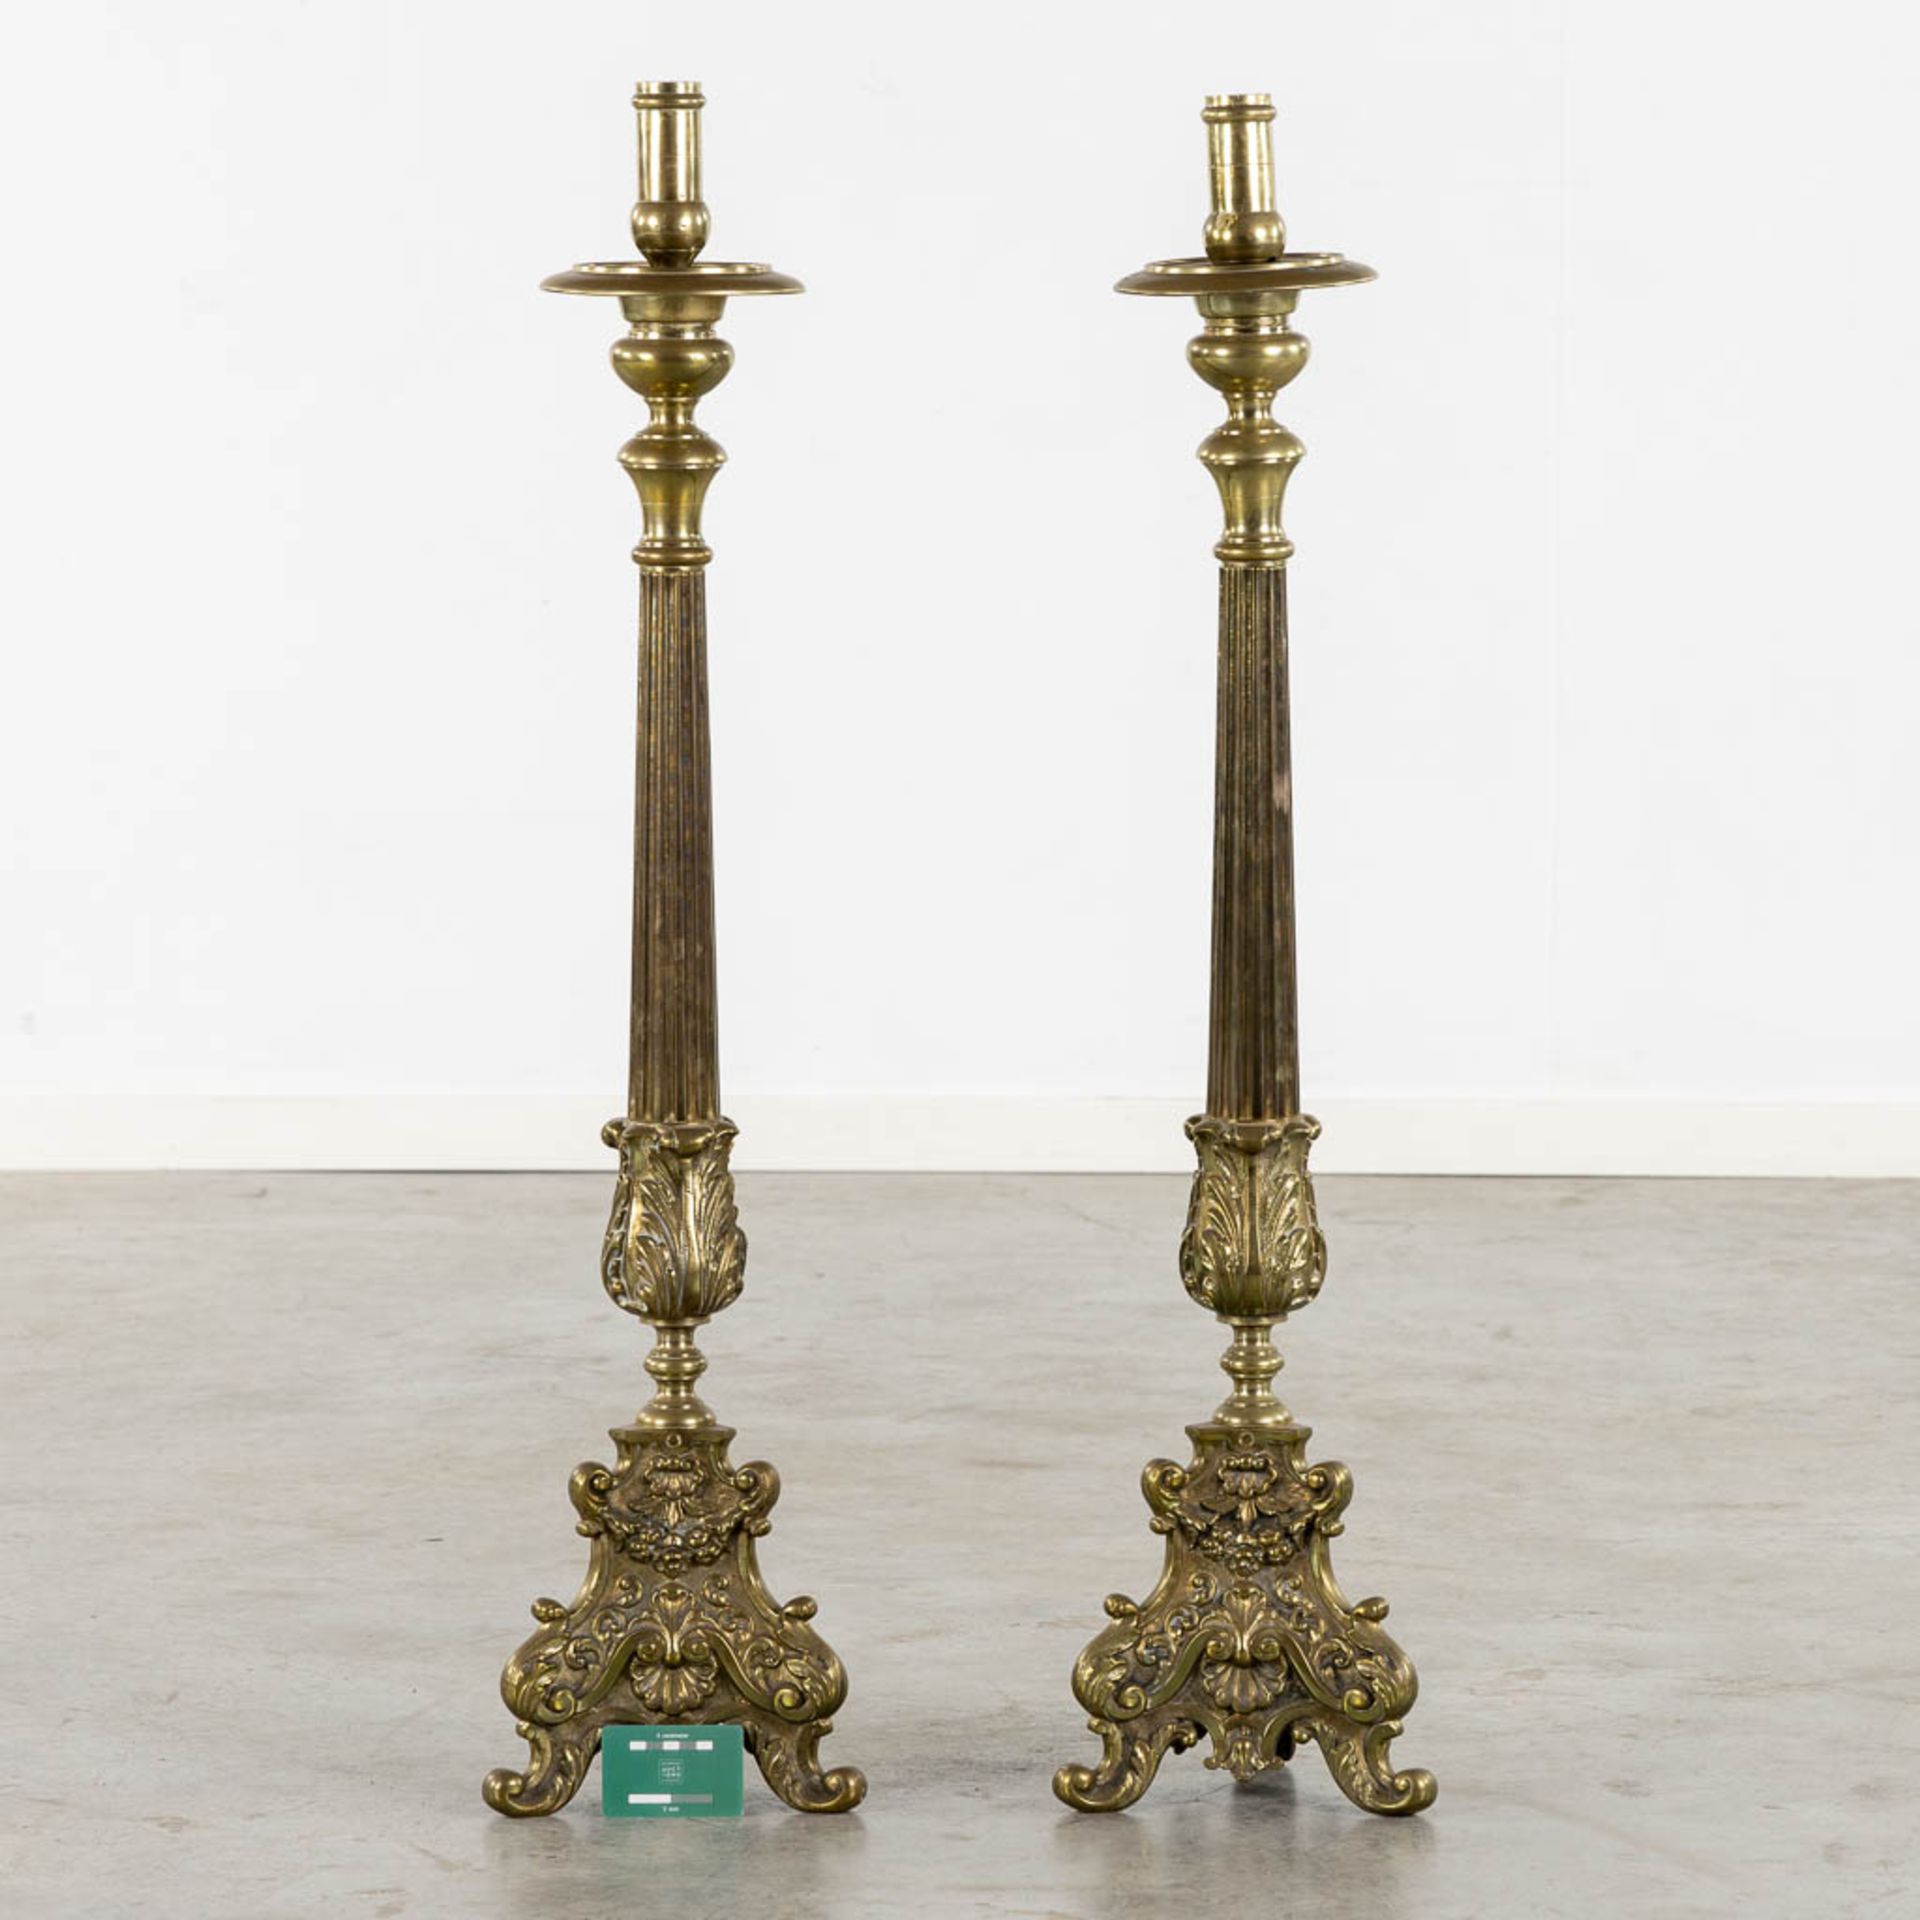 A pair of bronze church candlesticks/candle holders, Louis XV style. Circa 1900. (W:23 x H:105 cm) - Image 10 of 19